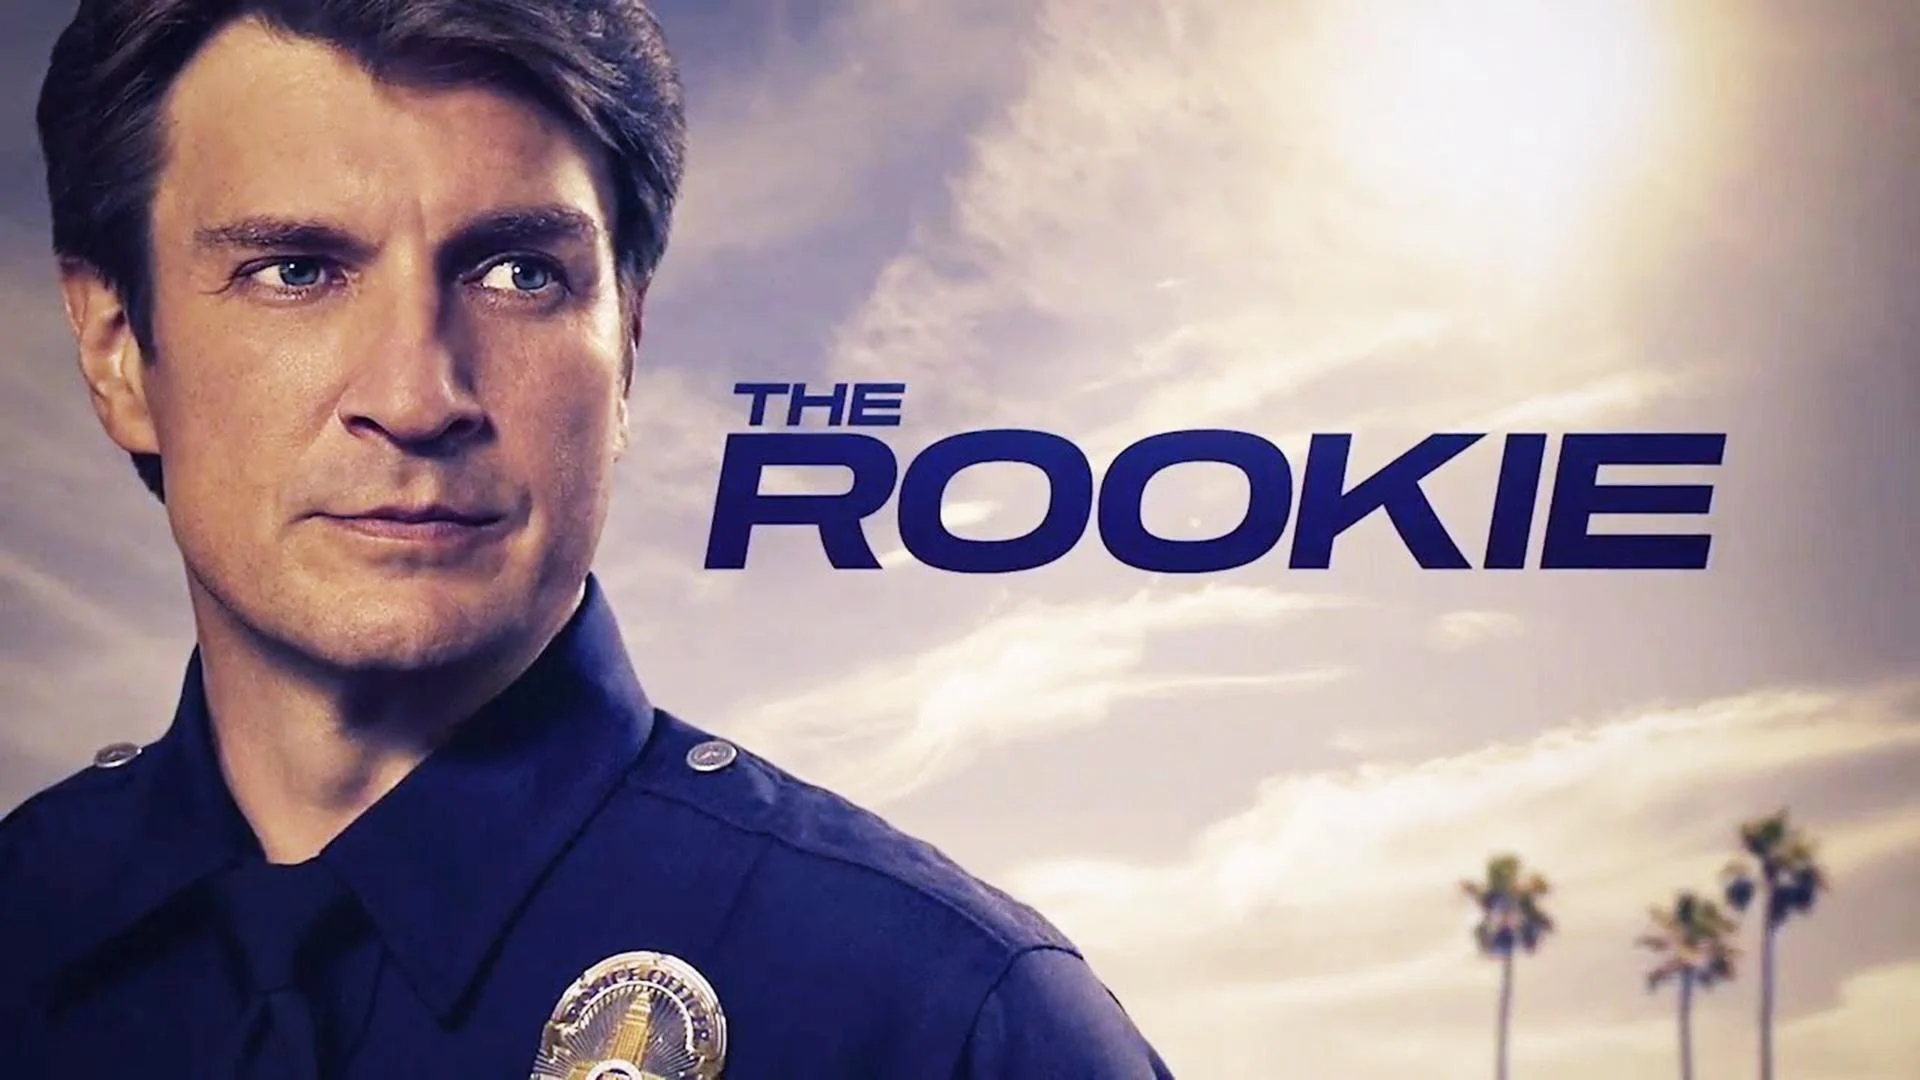 The Rookie Poster HD